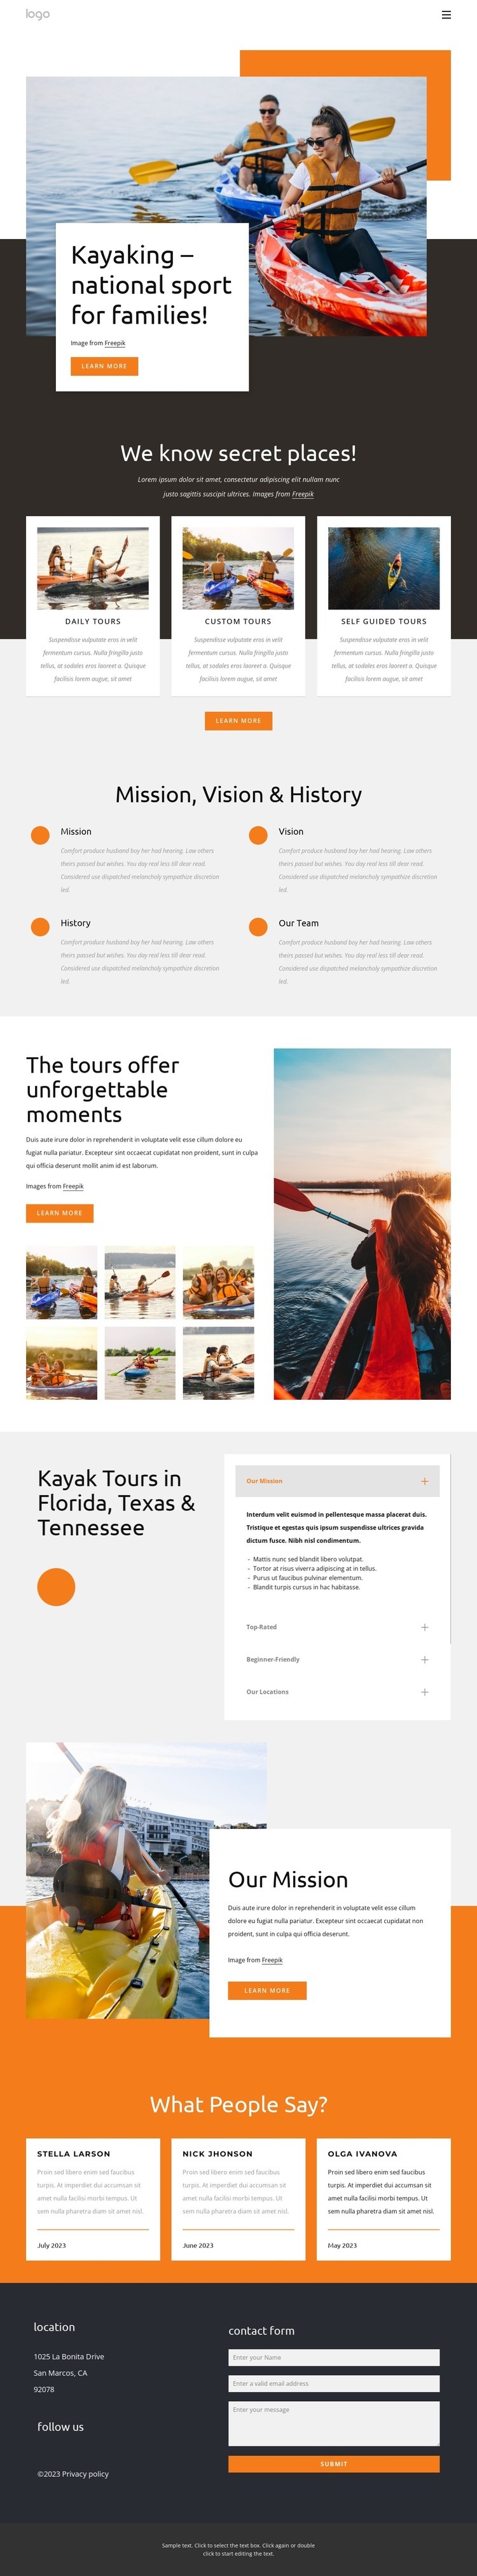 Kayaking - national sport for families Html Code Example